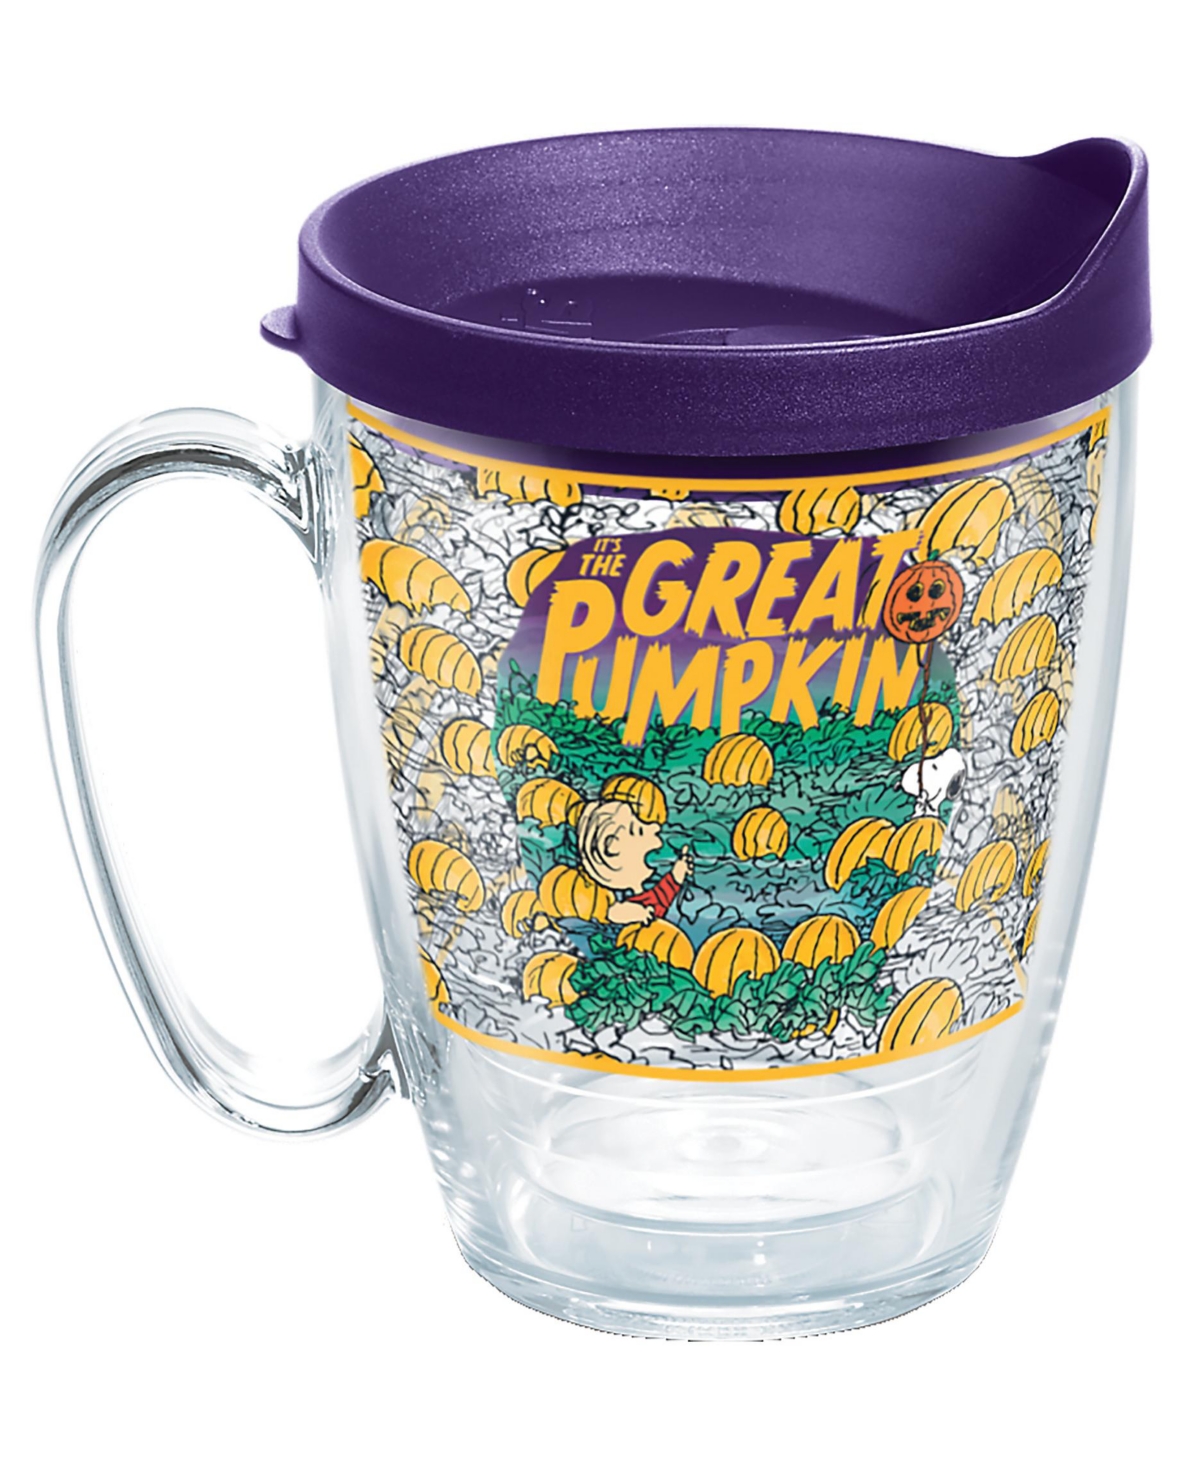 Tervis Tumbler Tervis Peanuts - Great Pumpkin Made In Usa Double Walled Insulated Tumbler Travel Cup Keeps Drinks C In Open Miscellaneous